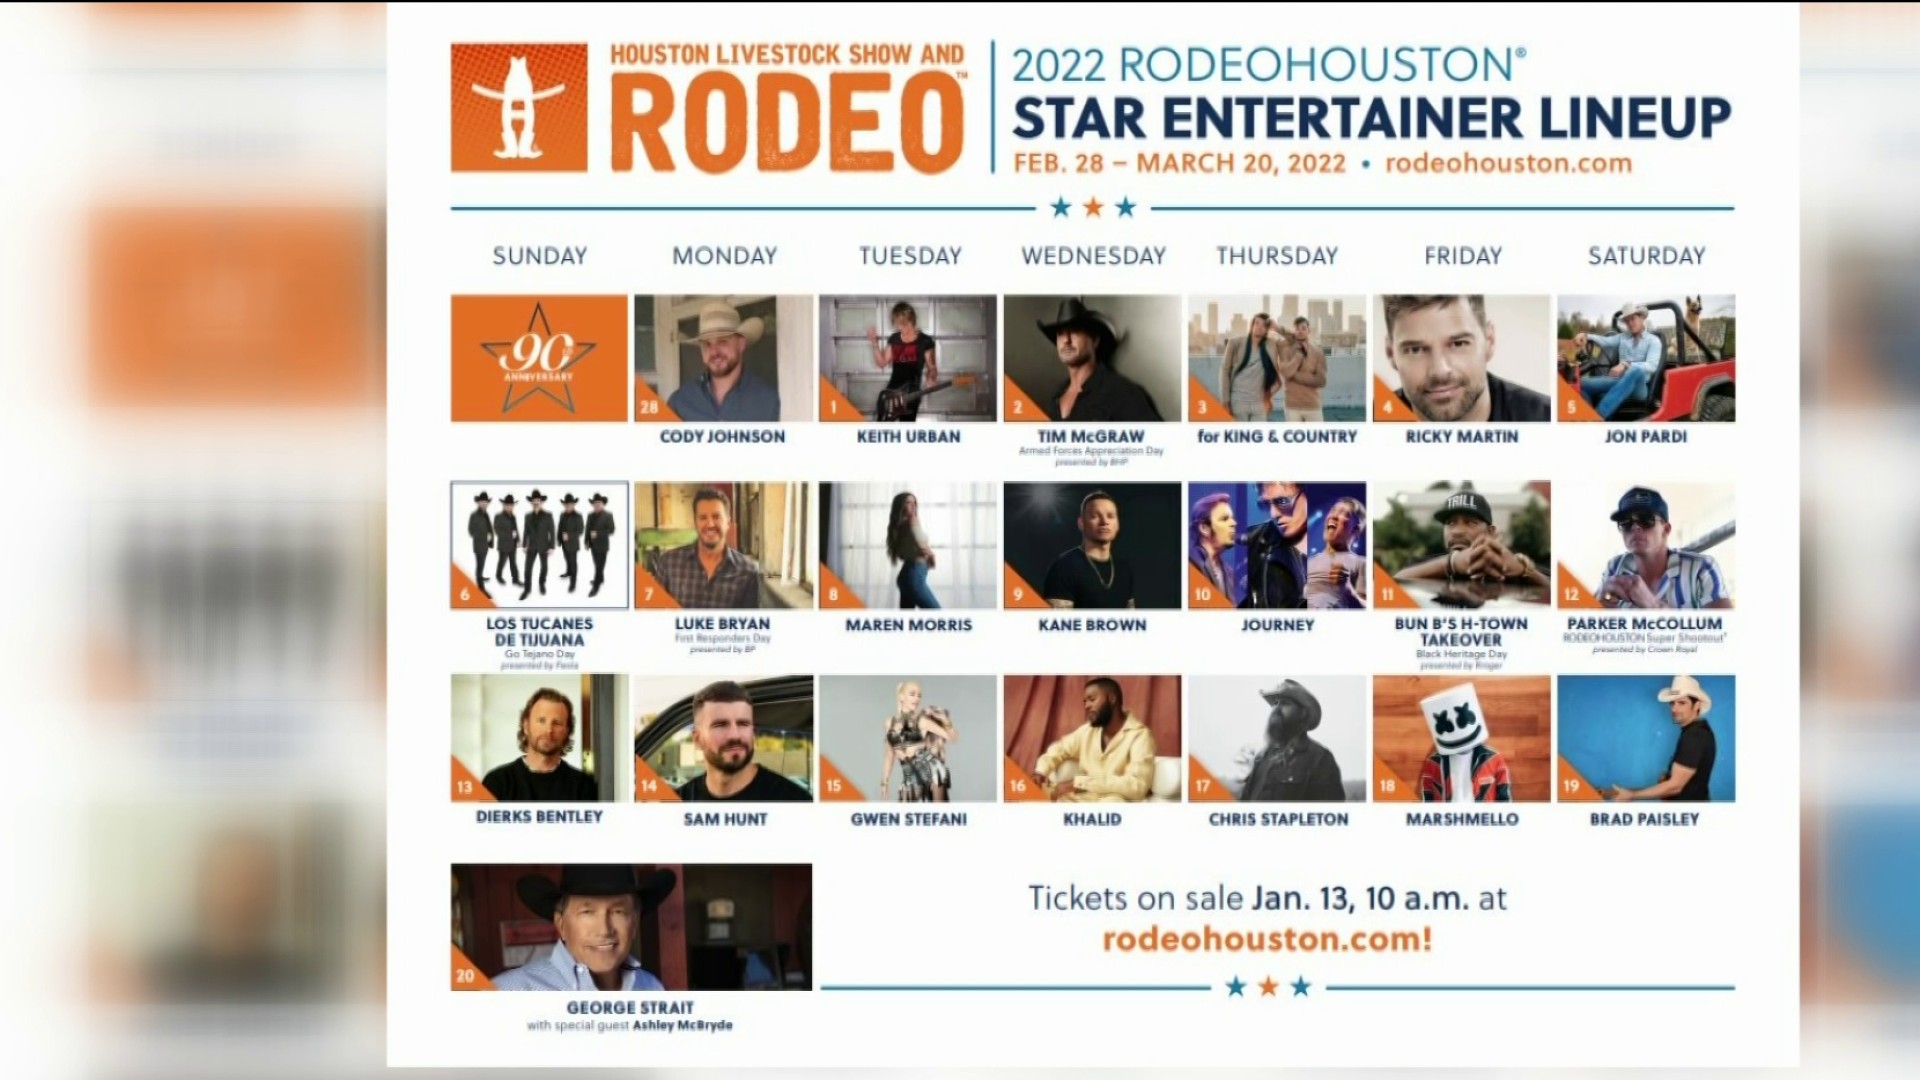 Houston Rodeo 2022 Schedule Ready 2 Rodeo? Gwen Stefani, Khalid, And Tim Mcgraw Among Rodeohouston's  Star-Studded 2022 Entertainment Lineup